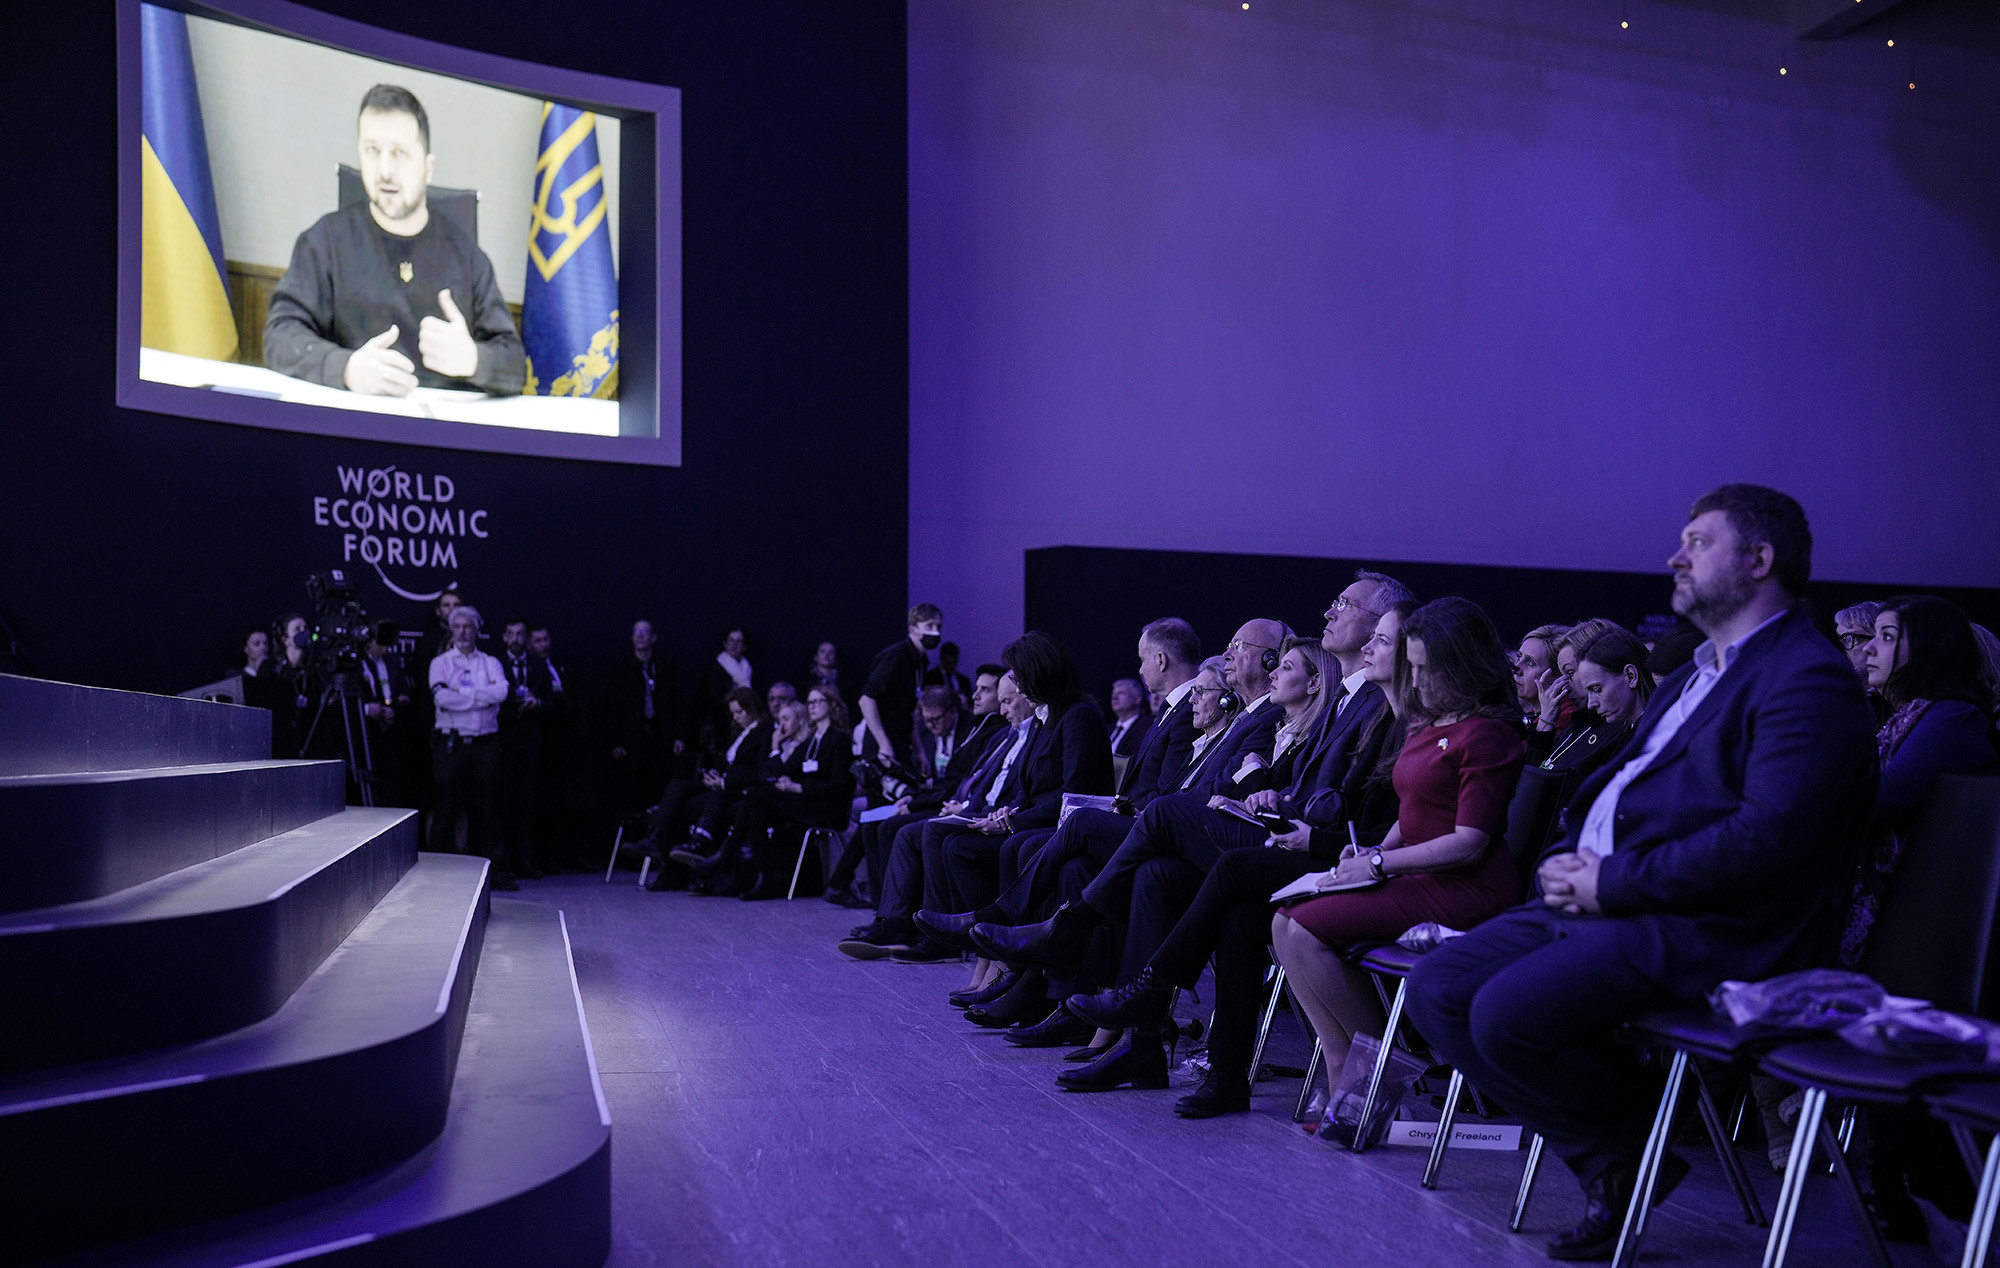 President Volodymyr Zelensky of Ukraine talks from a video screen to participants at the World Economic Forum in Davos, Switzerland, on January 18.